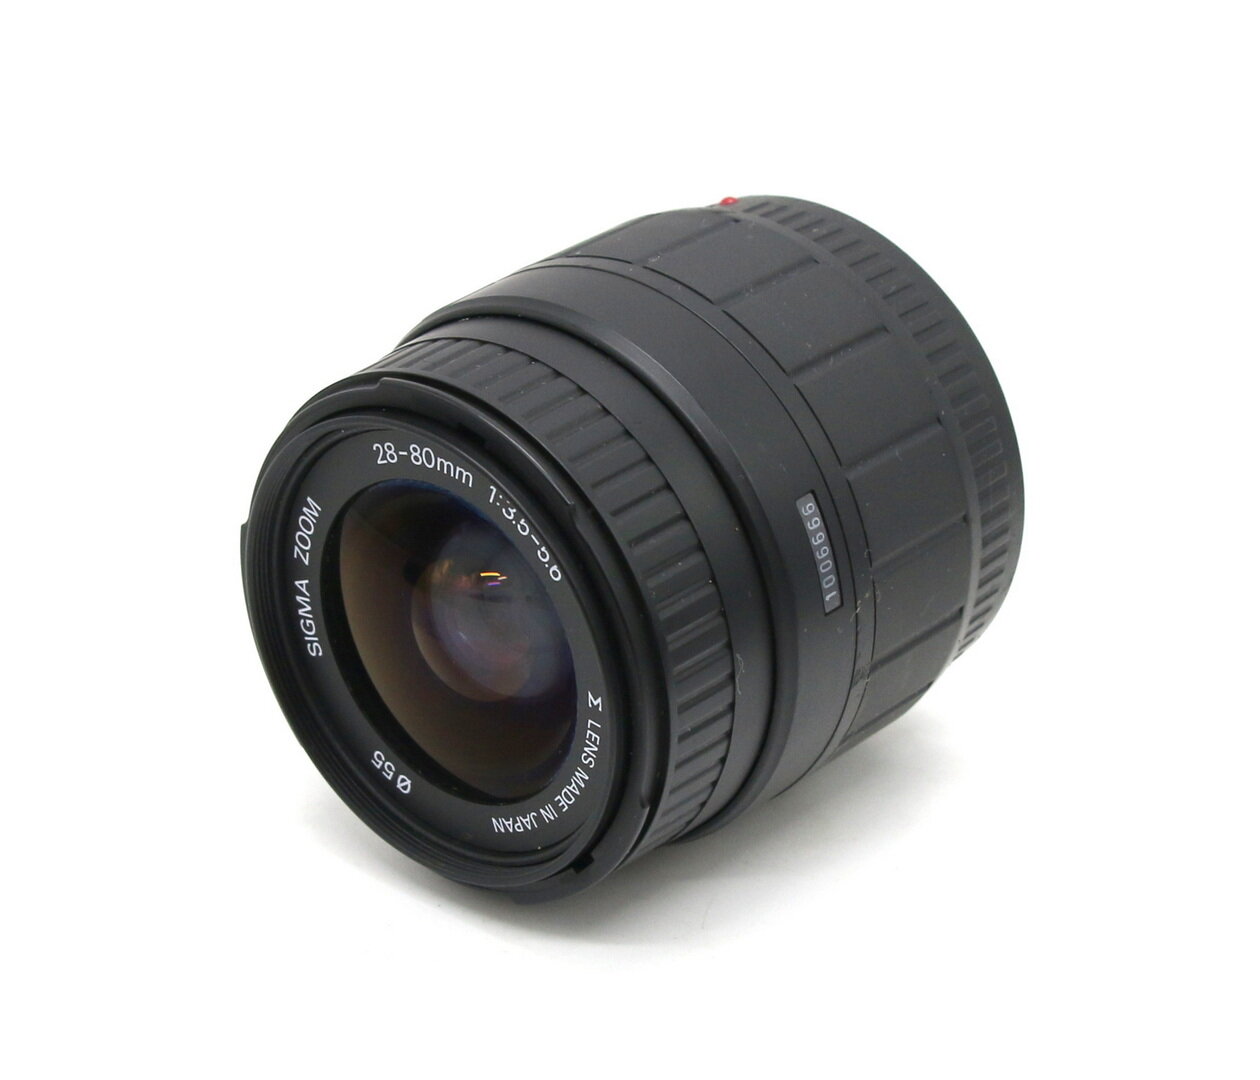 Sigma AF Zoom 28-80mm f/3.5-5.6 Aspherical for Sony A